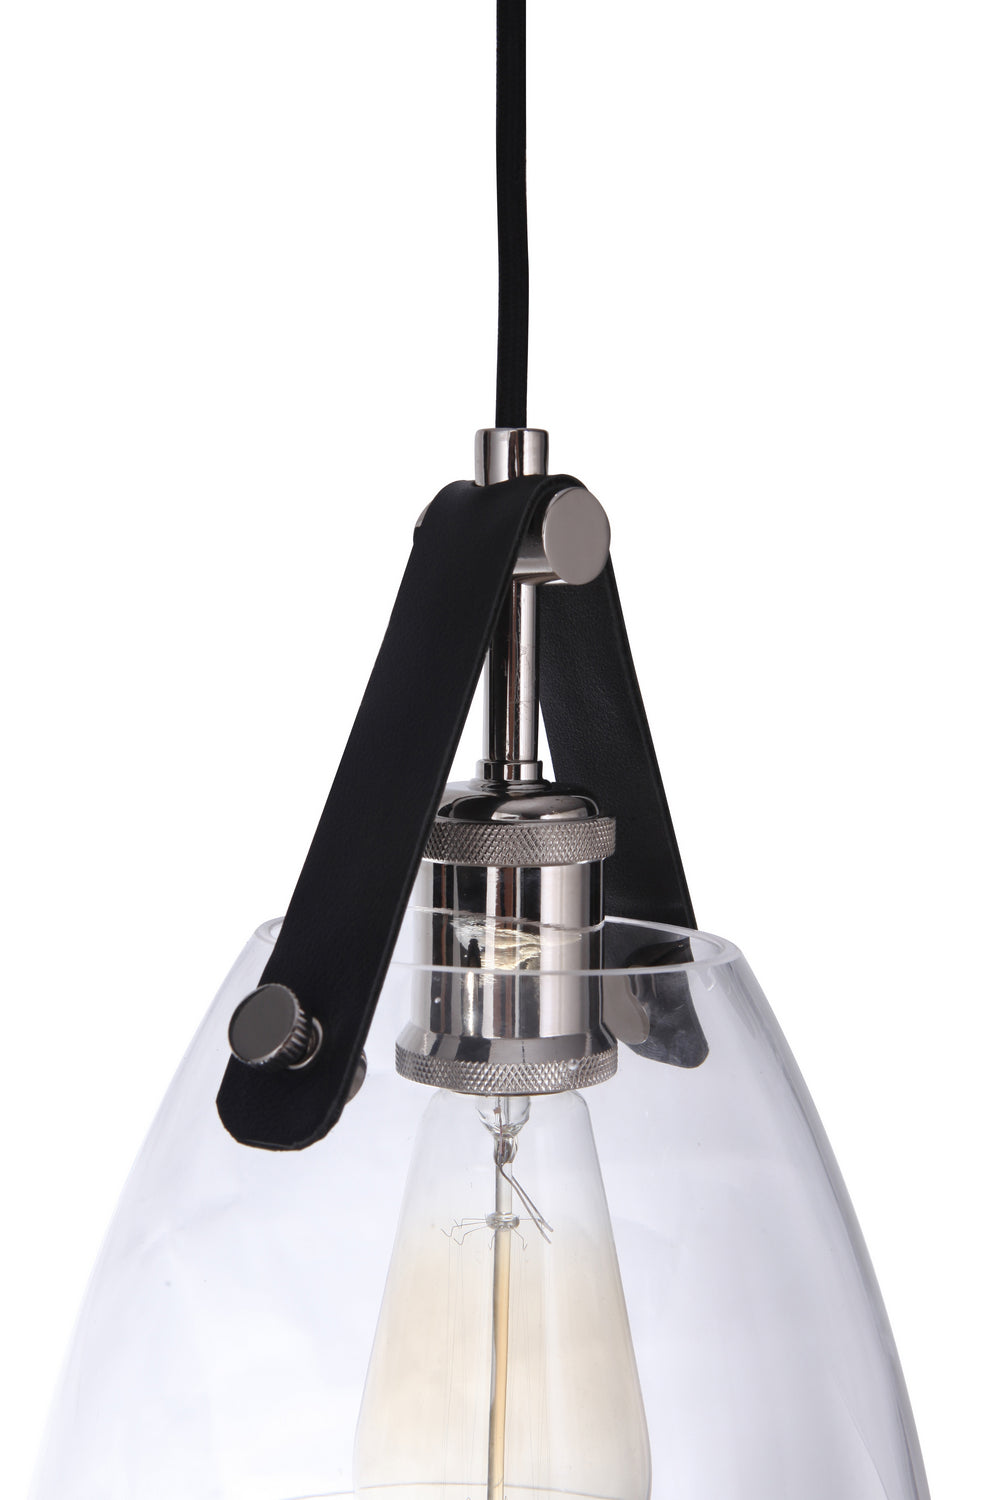 Craftmade One Light Pendant from the Hagen collection in Polished Nickel finish